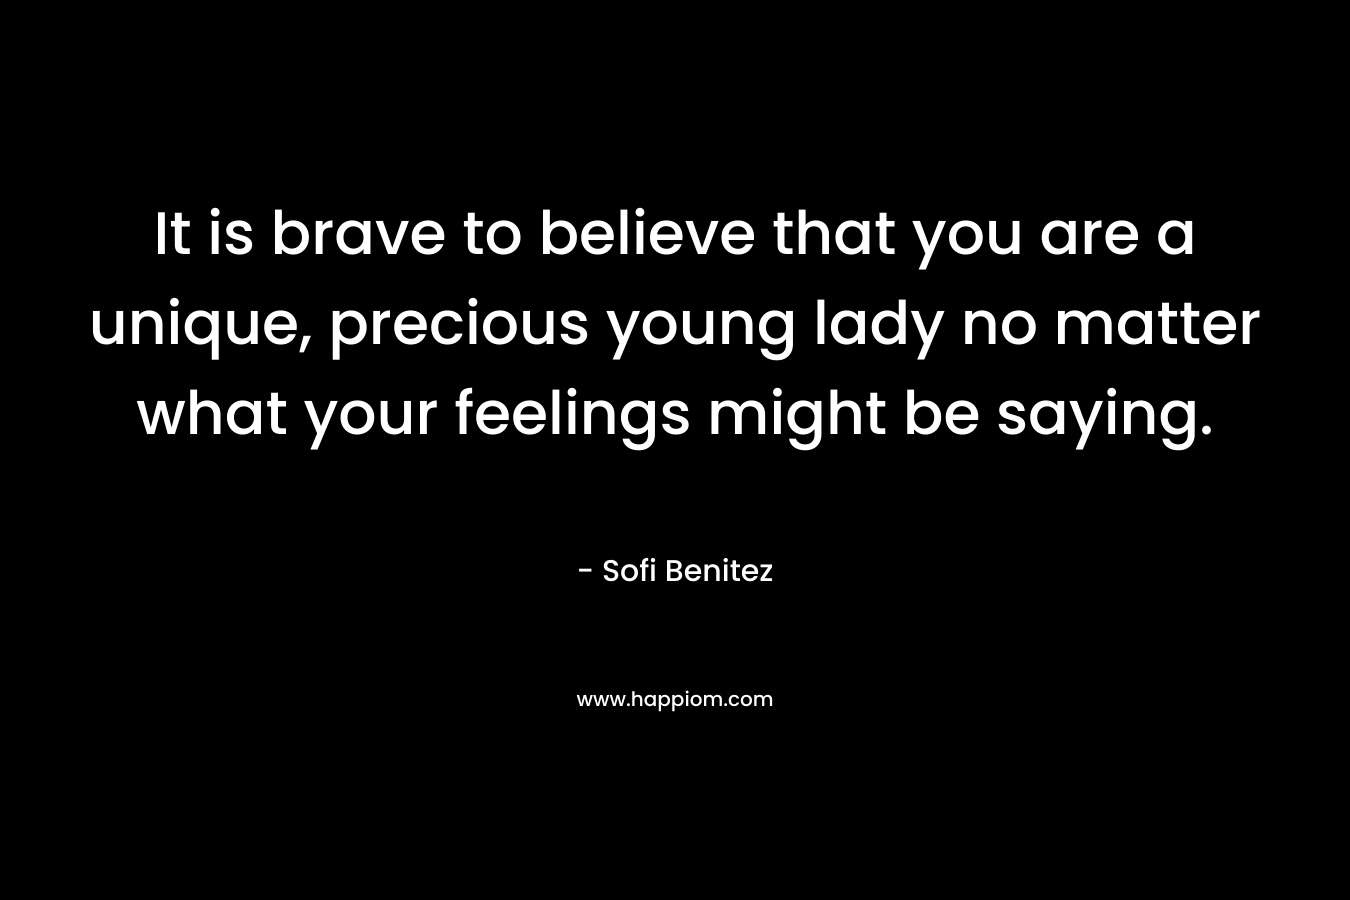 It is brave to believe that you are a unique, precious young lady no matter what your feelings might be saying.